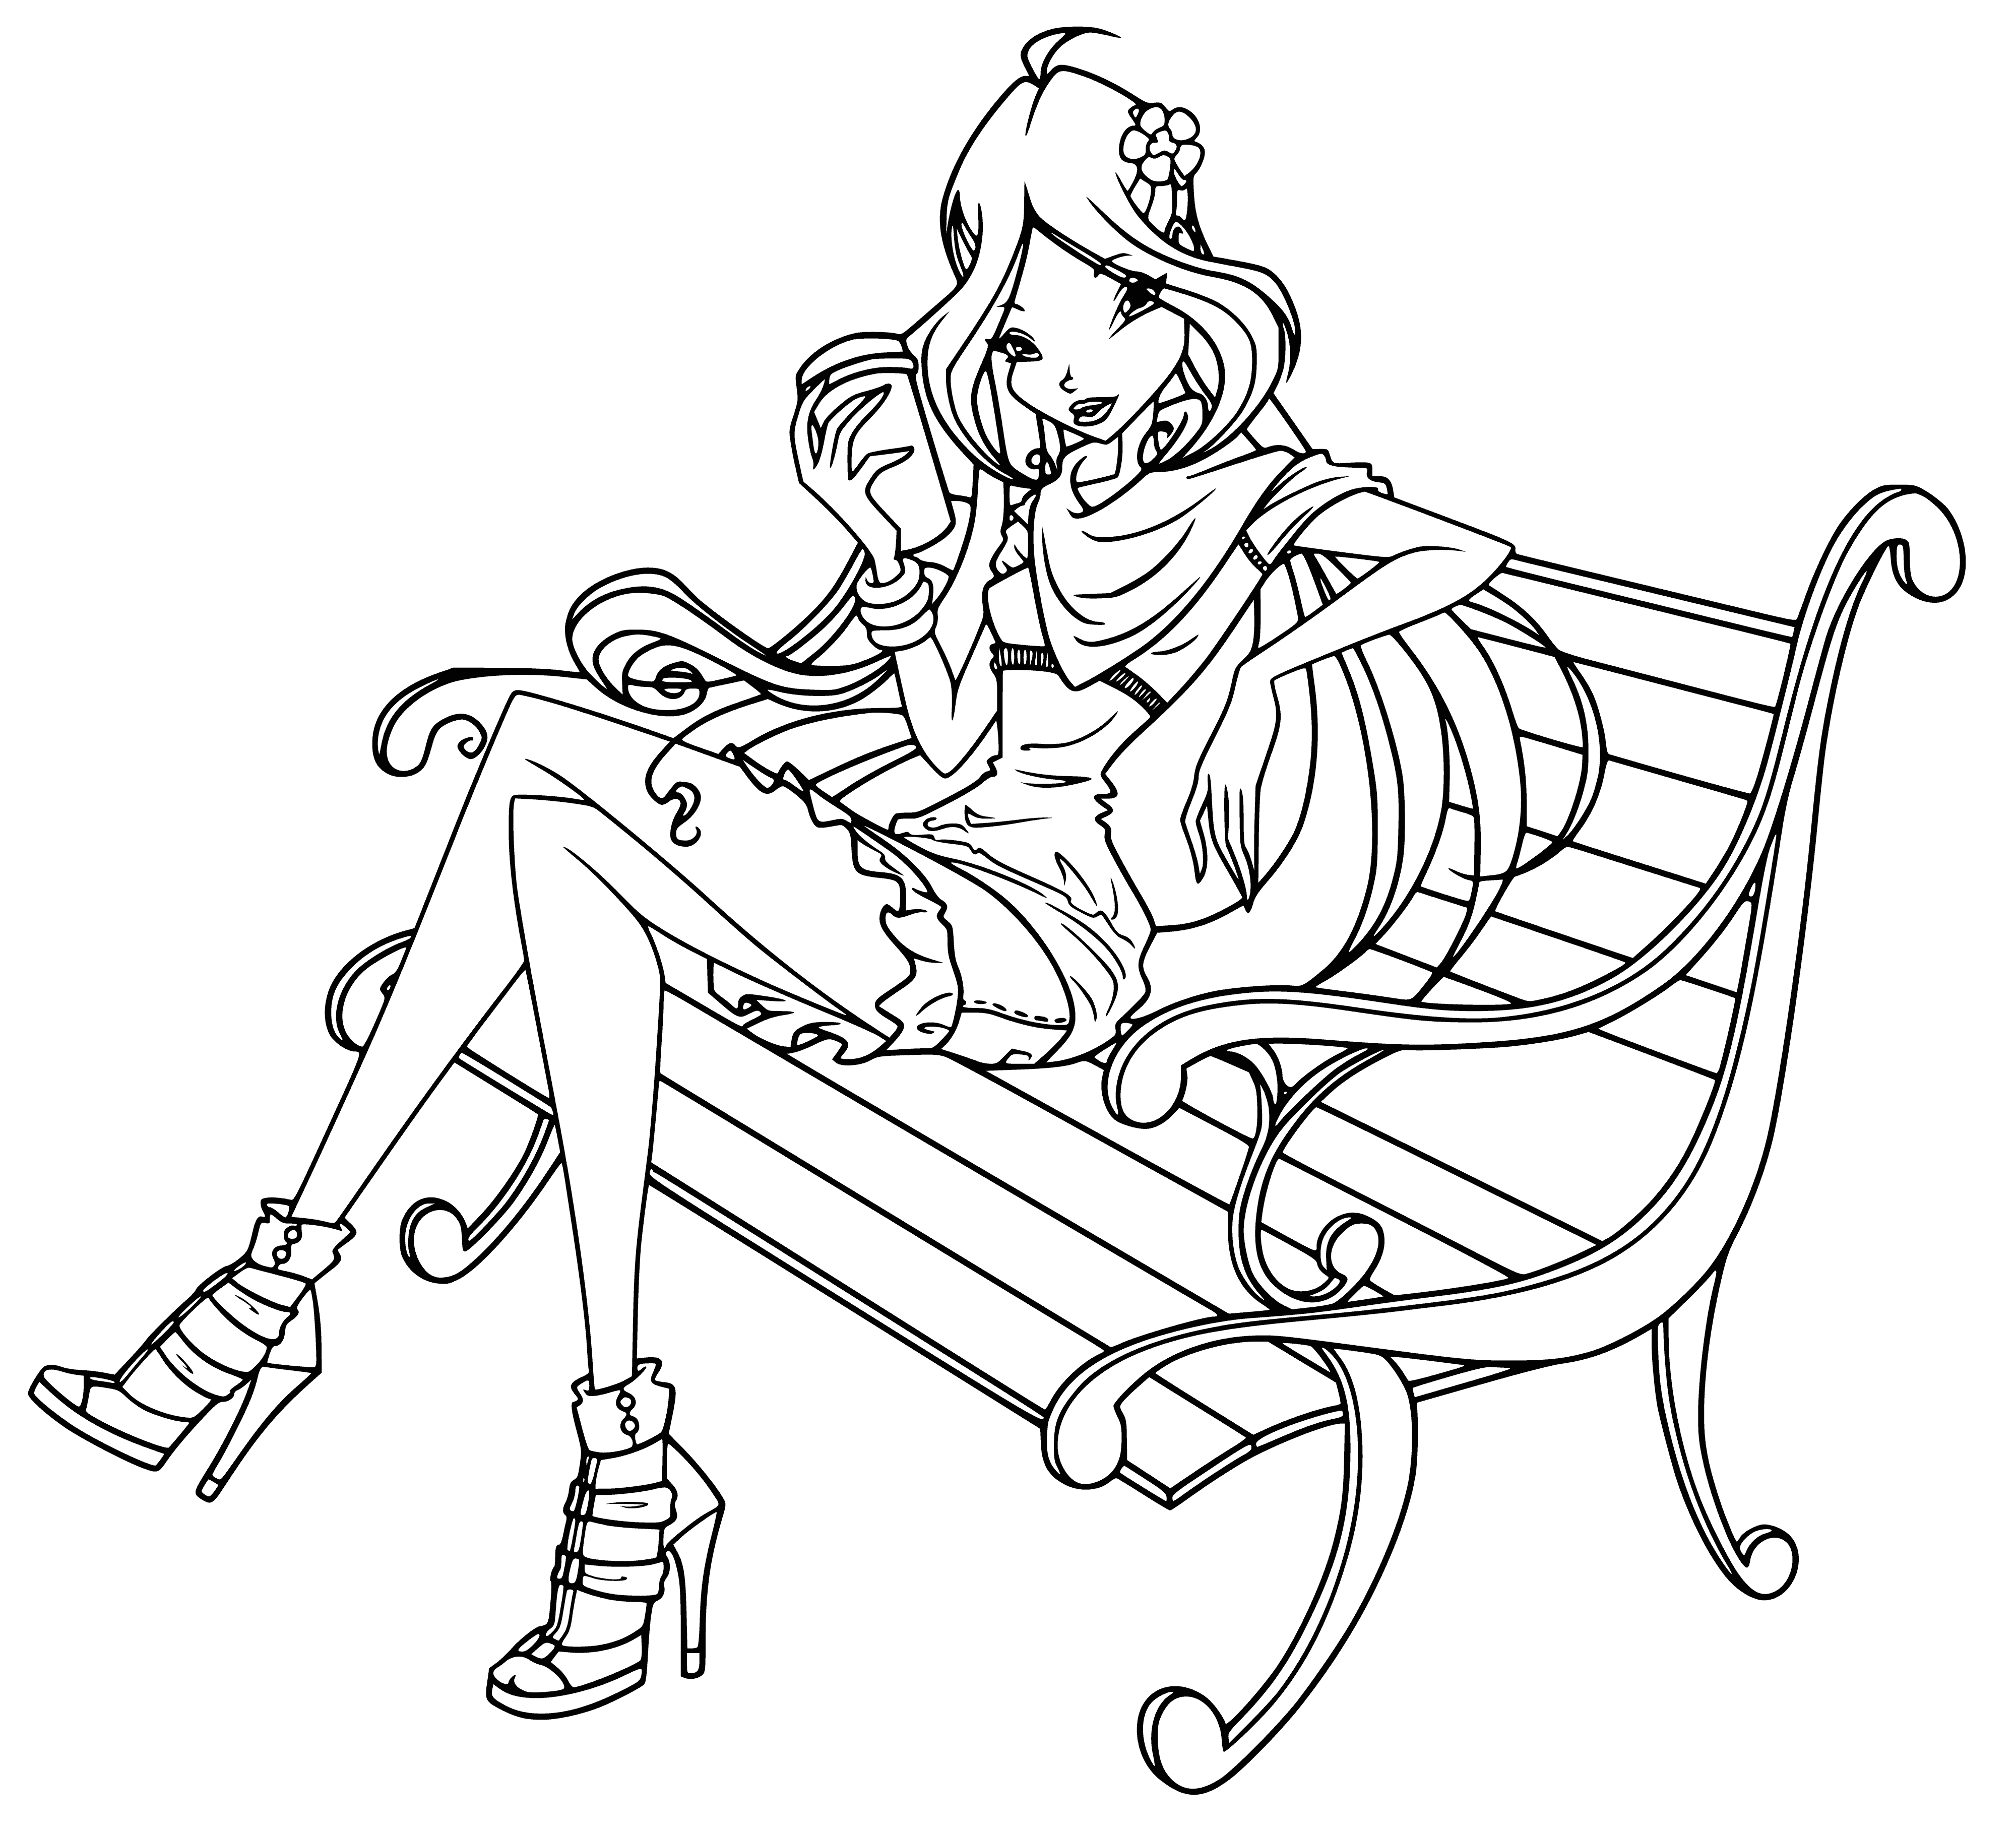 coloring page: Girl w/ dyed red hair sits on park bench w/ dog on her lap. Wearing patterned dress, black leggings & red shoes.